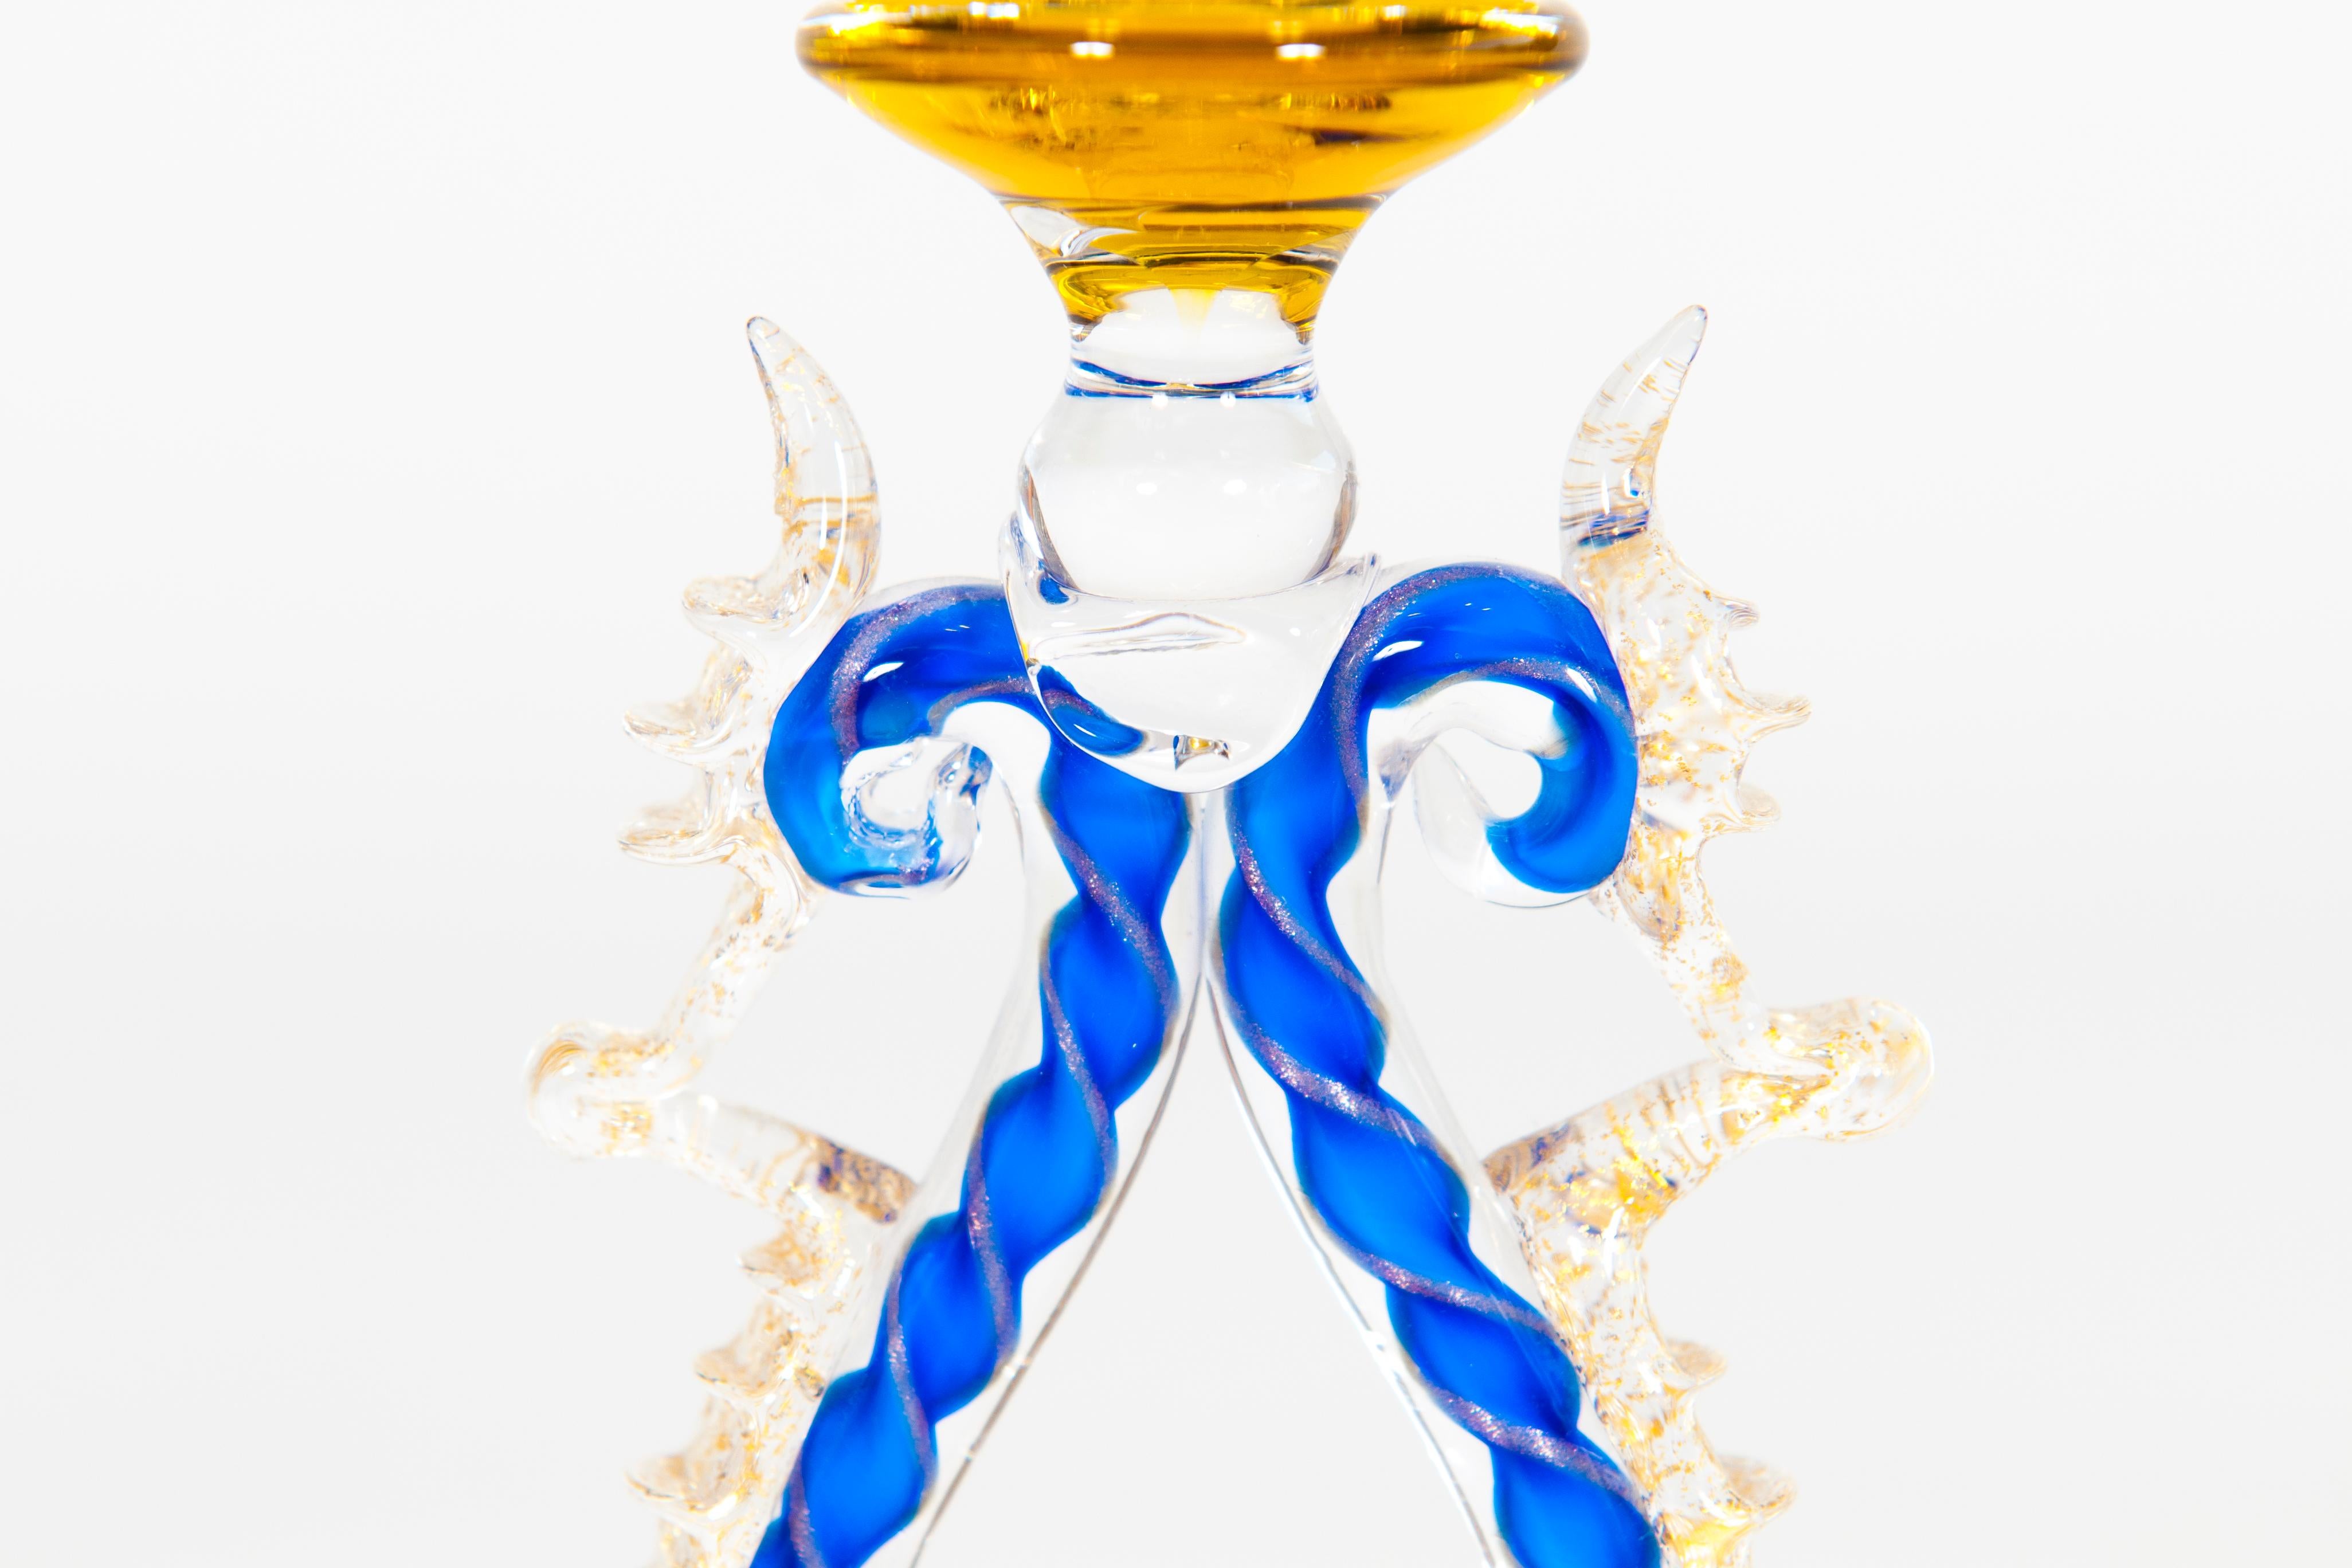 Late 20th Century Yellow and Blue Venetian Goblet with Gold Finishes in Murano Glass, Italy, 1990s